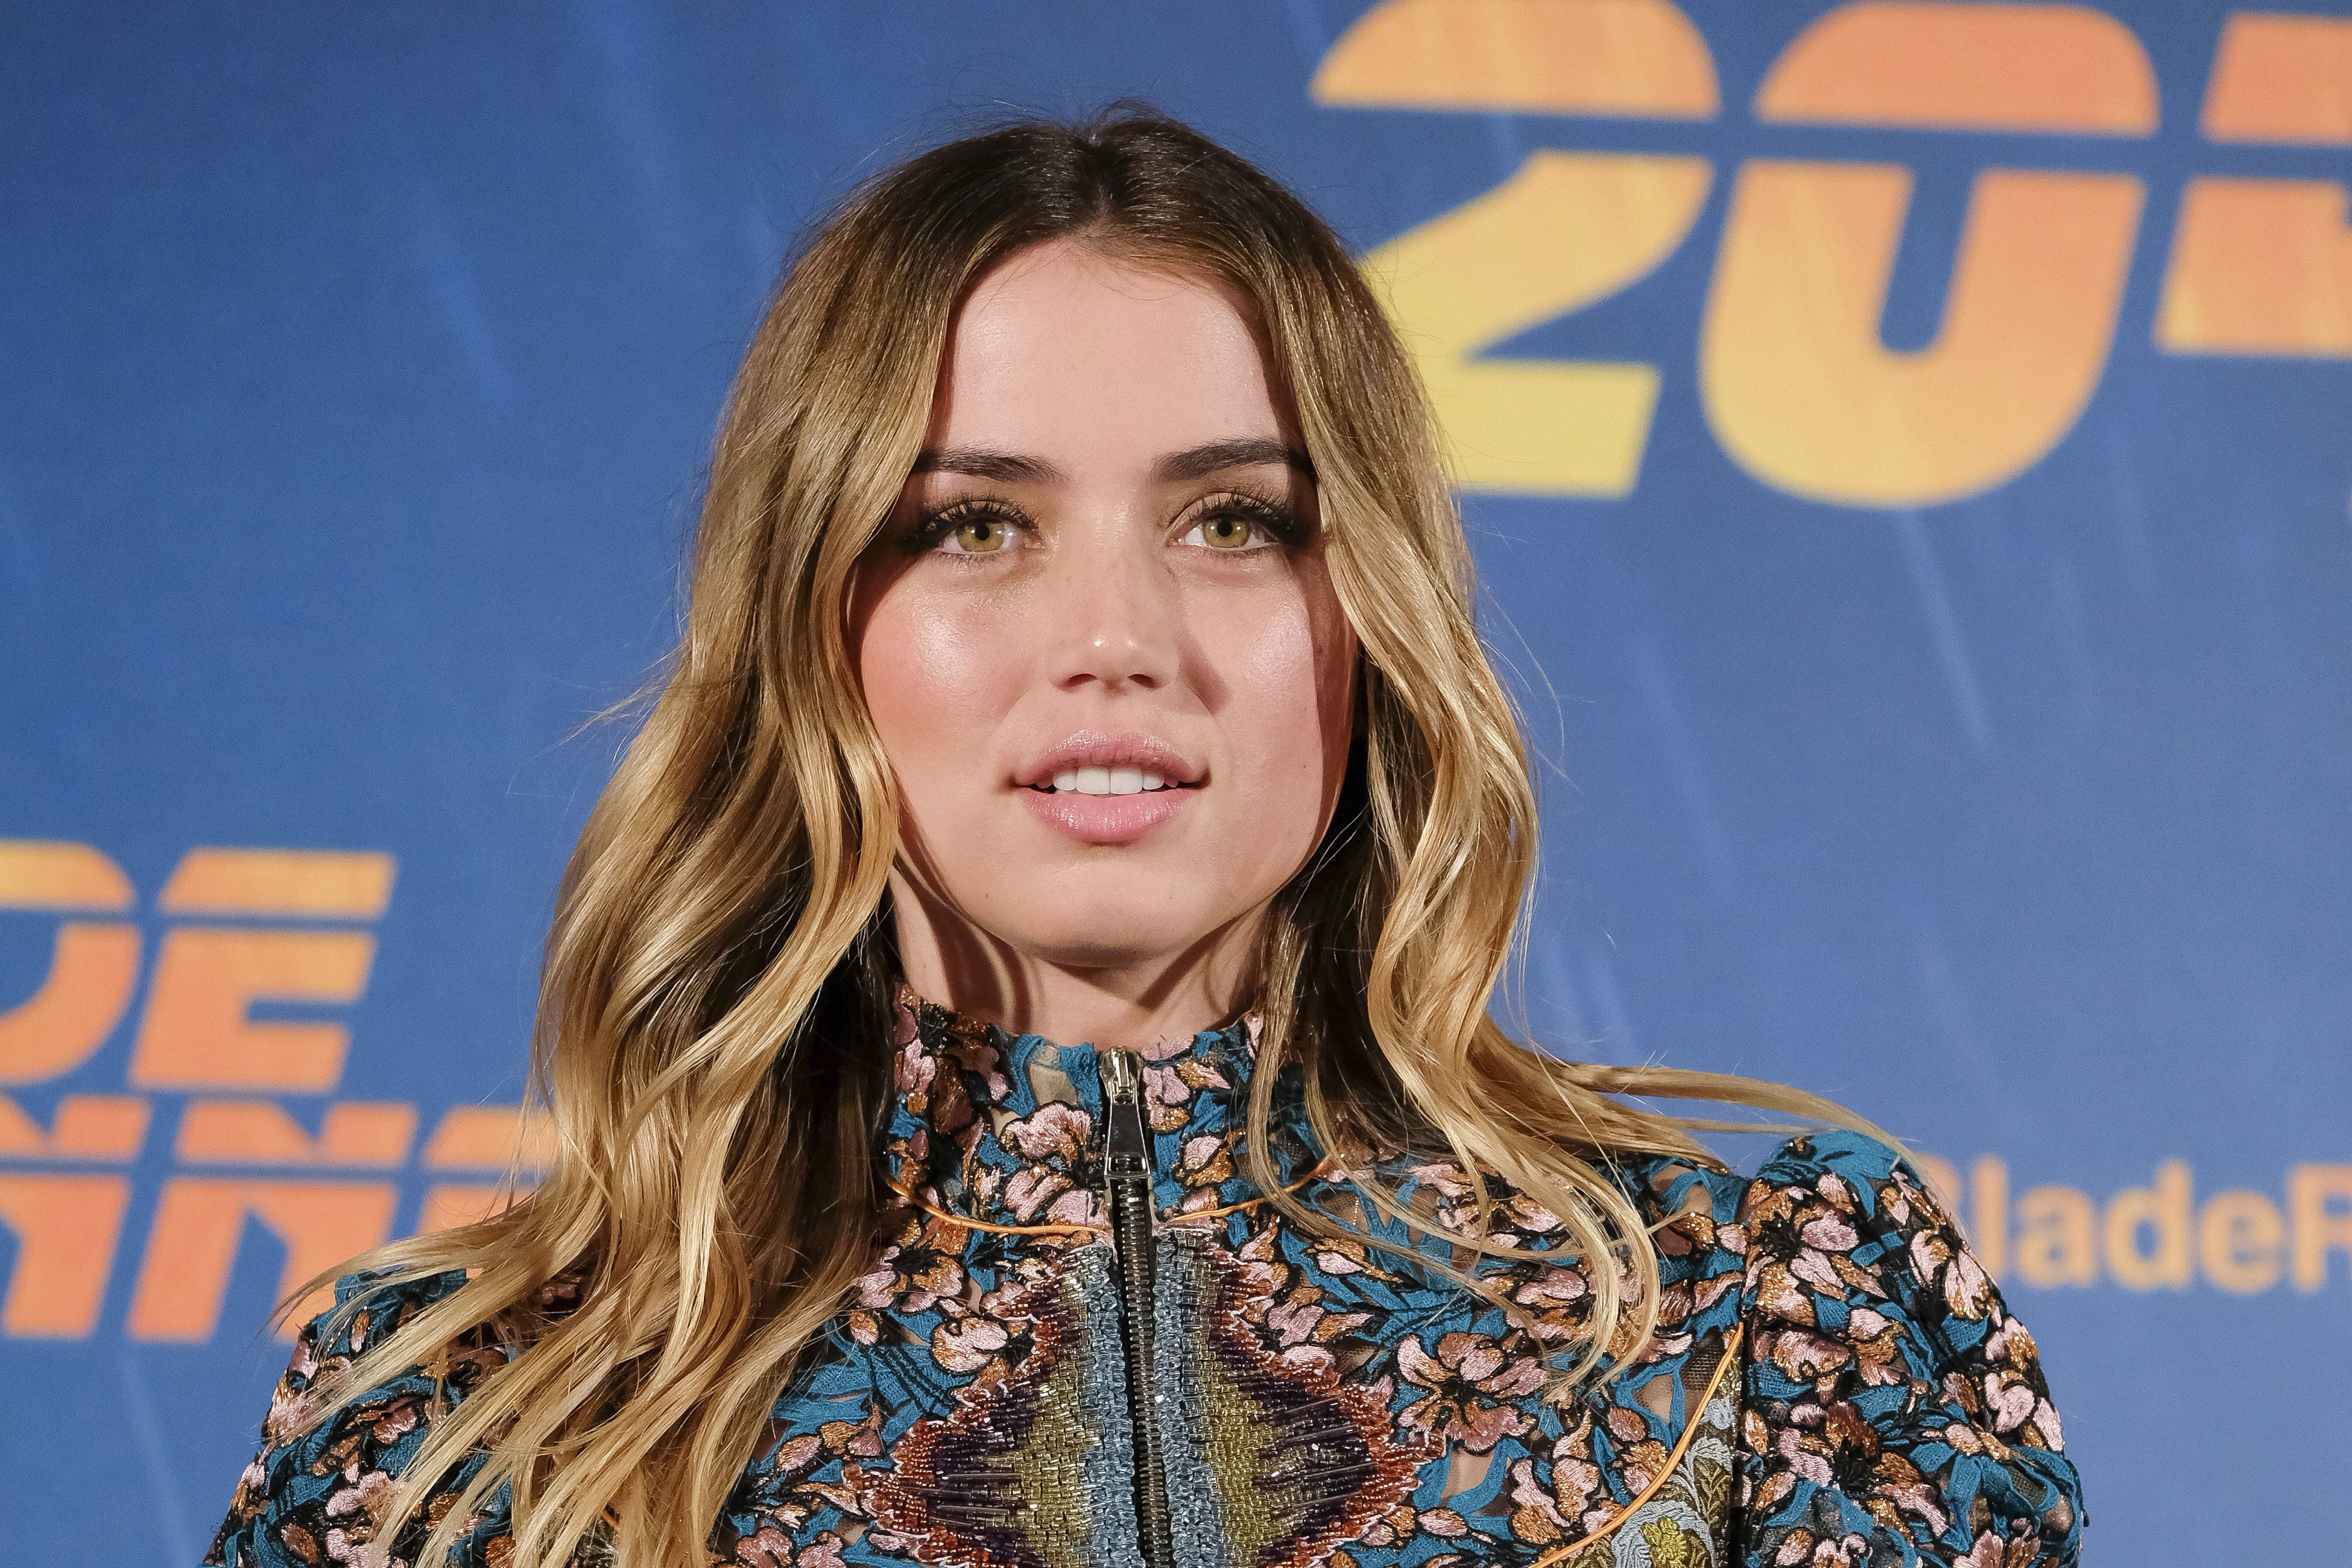 Ana de Armas shares new photos of her celebrating the New Year